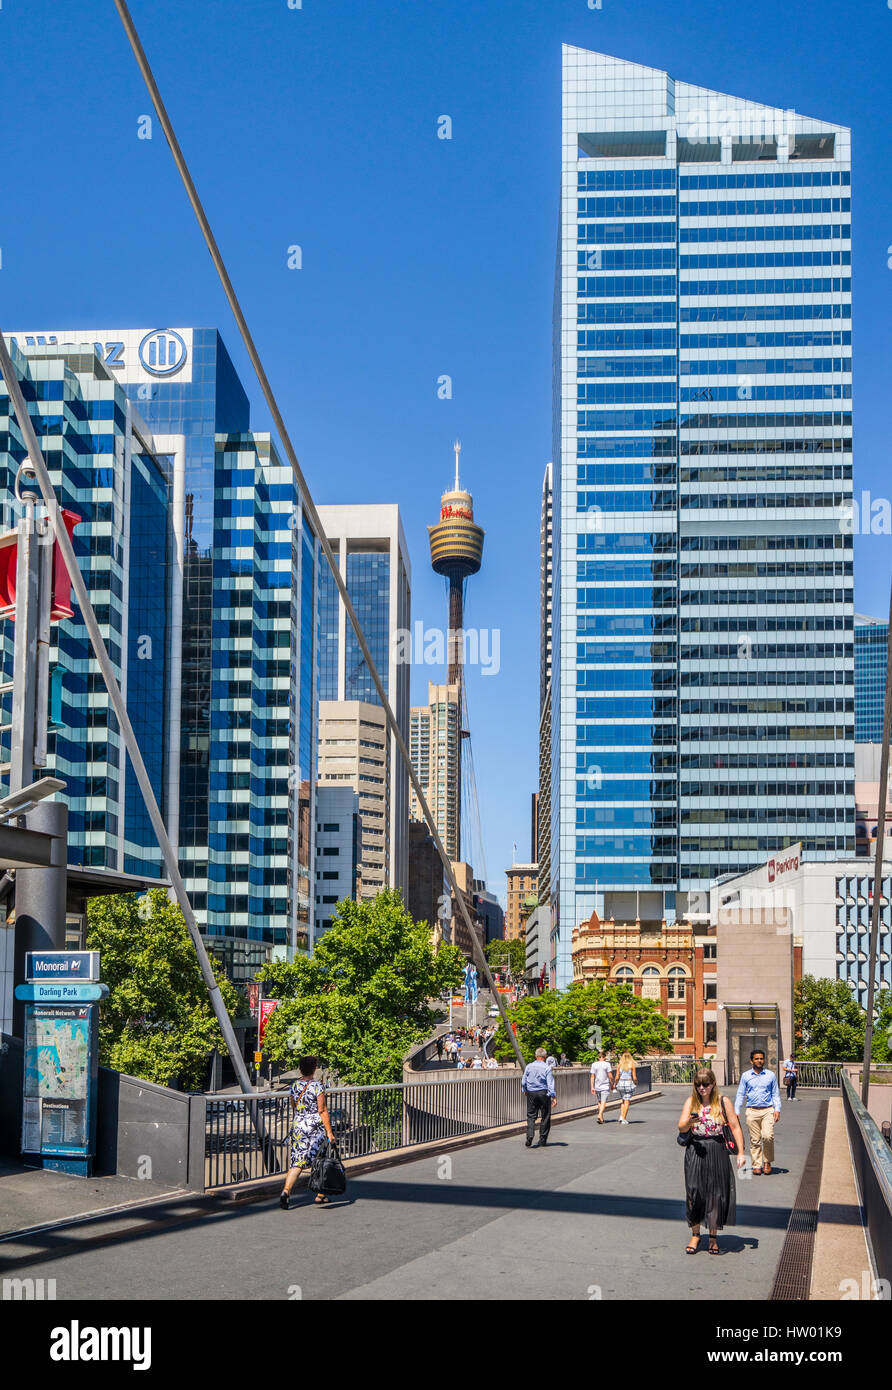 Australia, New South Wales, Sydney, city view from the pedestrian bridge connecting Pyrmont Bridge with Market Street, with the view of BT Tower and S Stock Photo